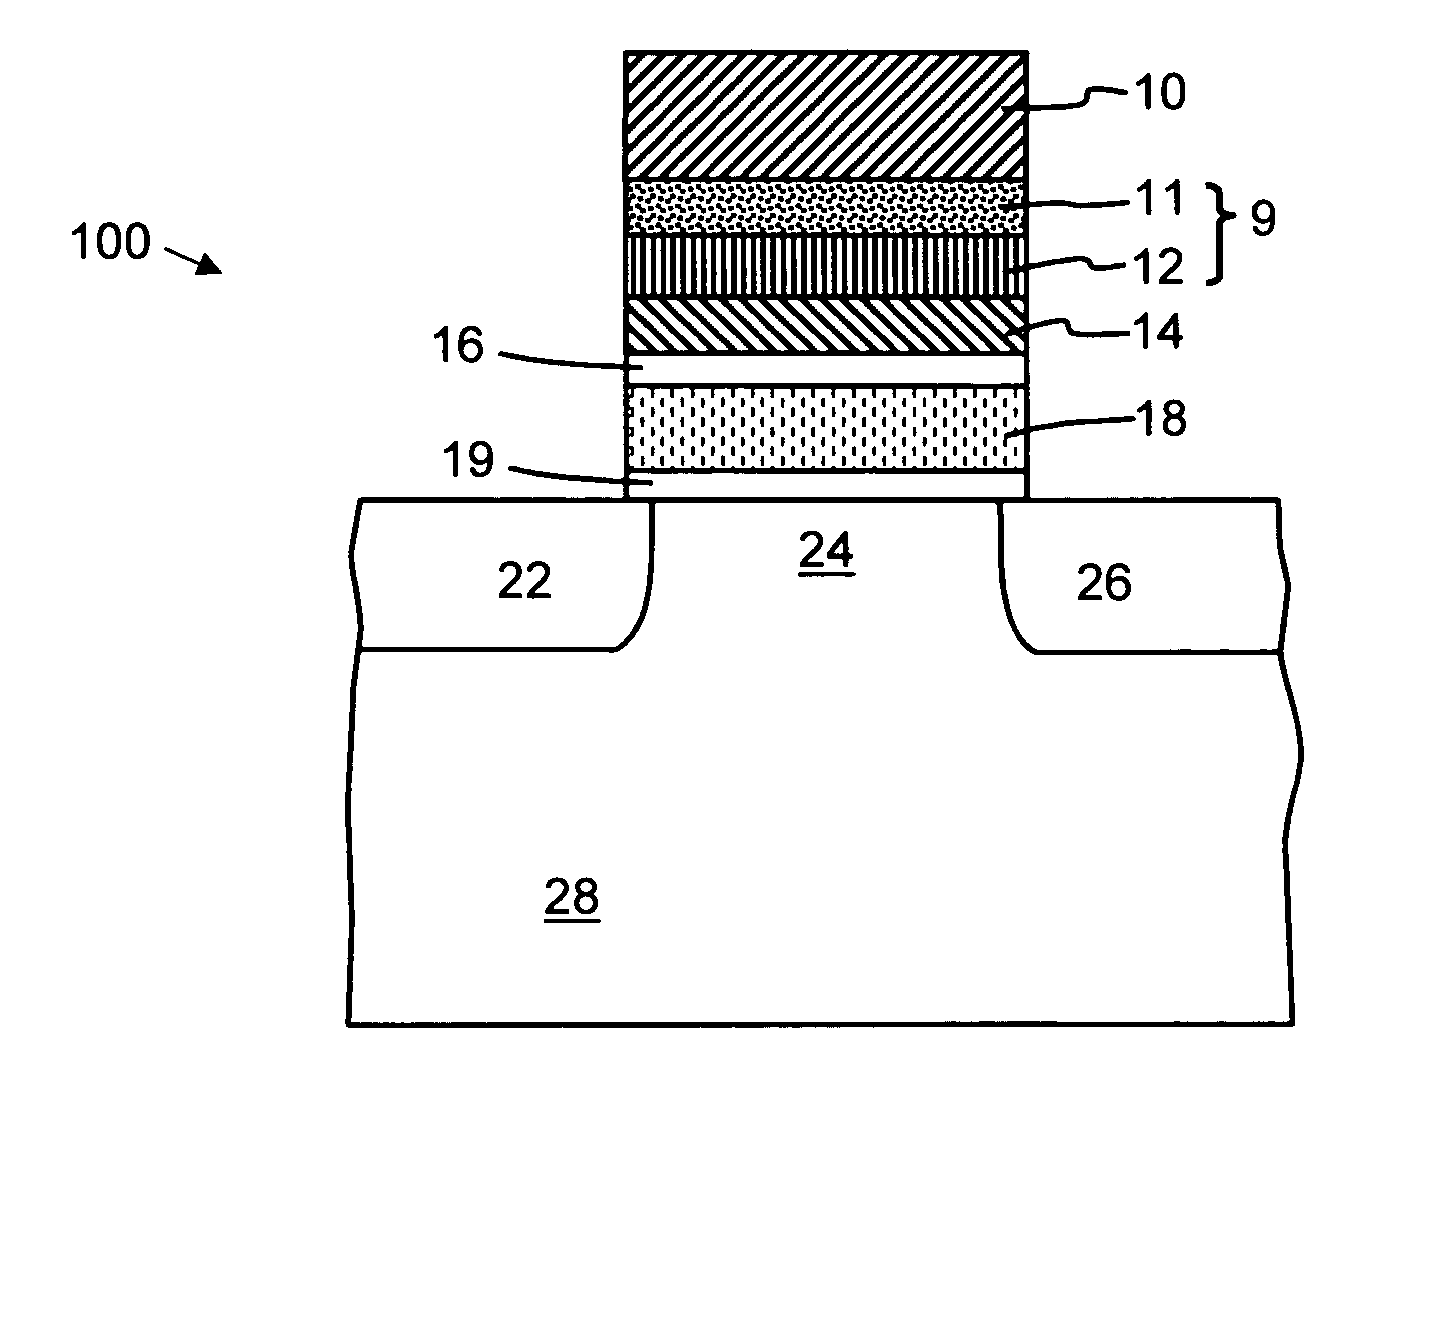 Electrically alterable memory cell